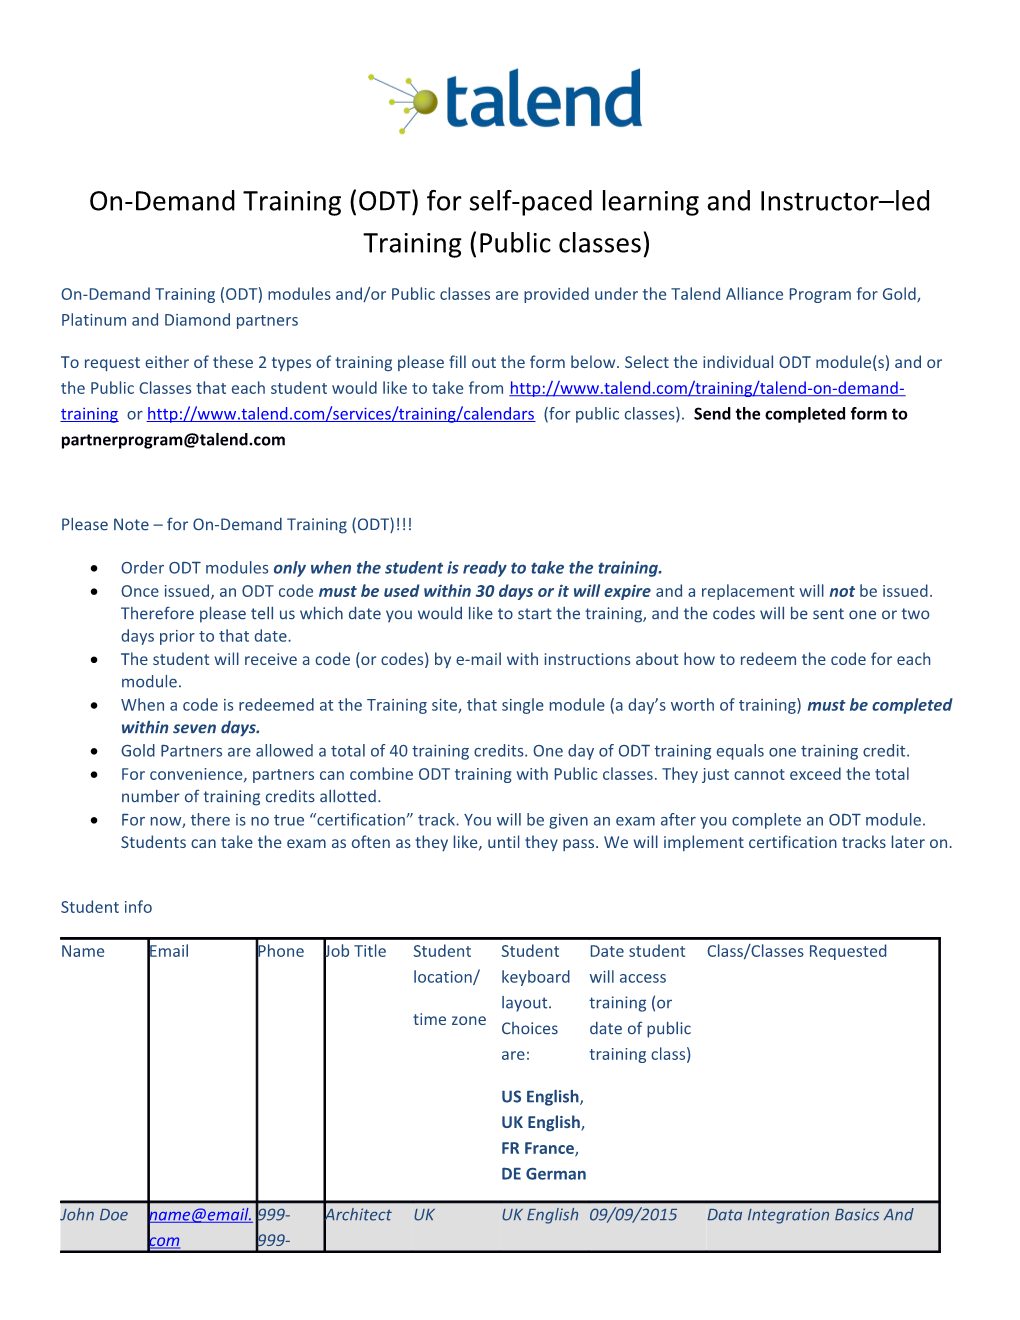 On-Demand Training (ODT) for Self-Paced Learning and Instructor Led Training (Public Classes)